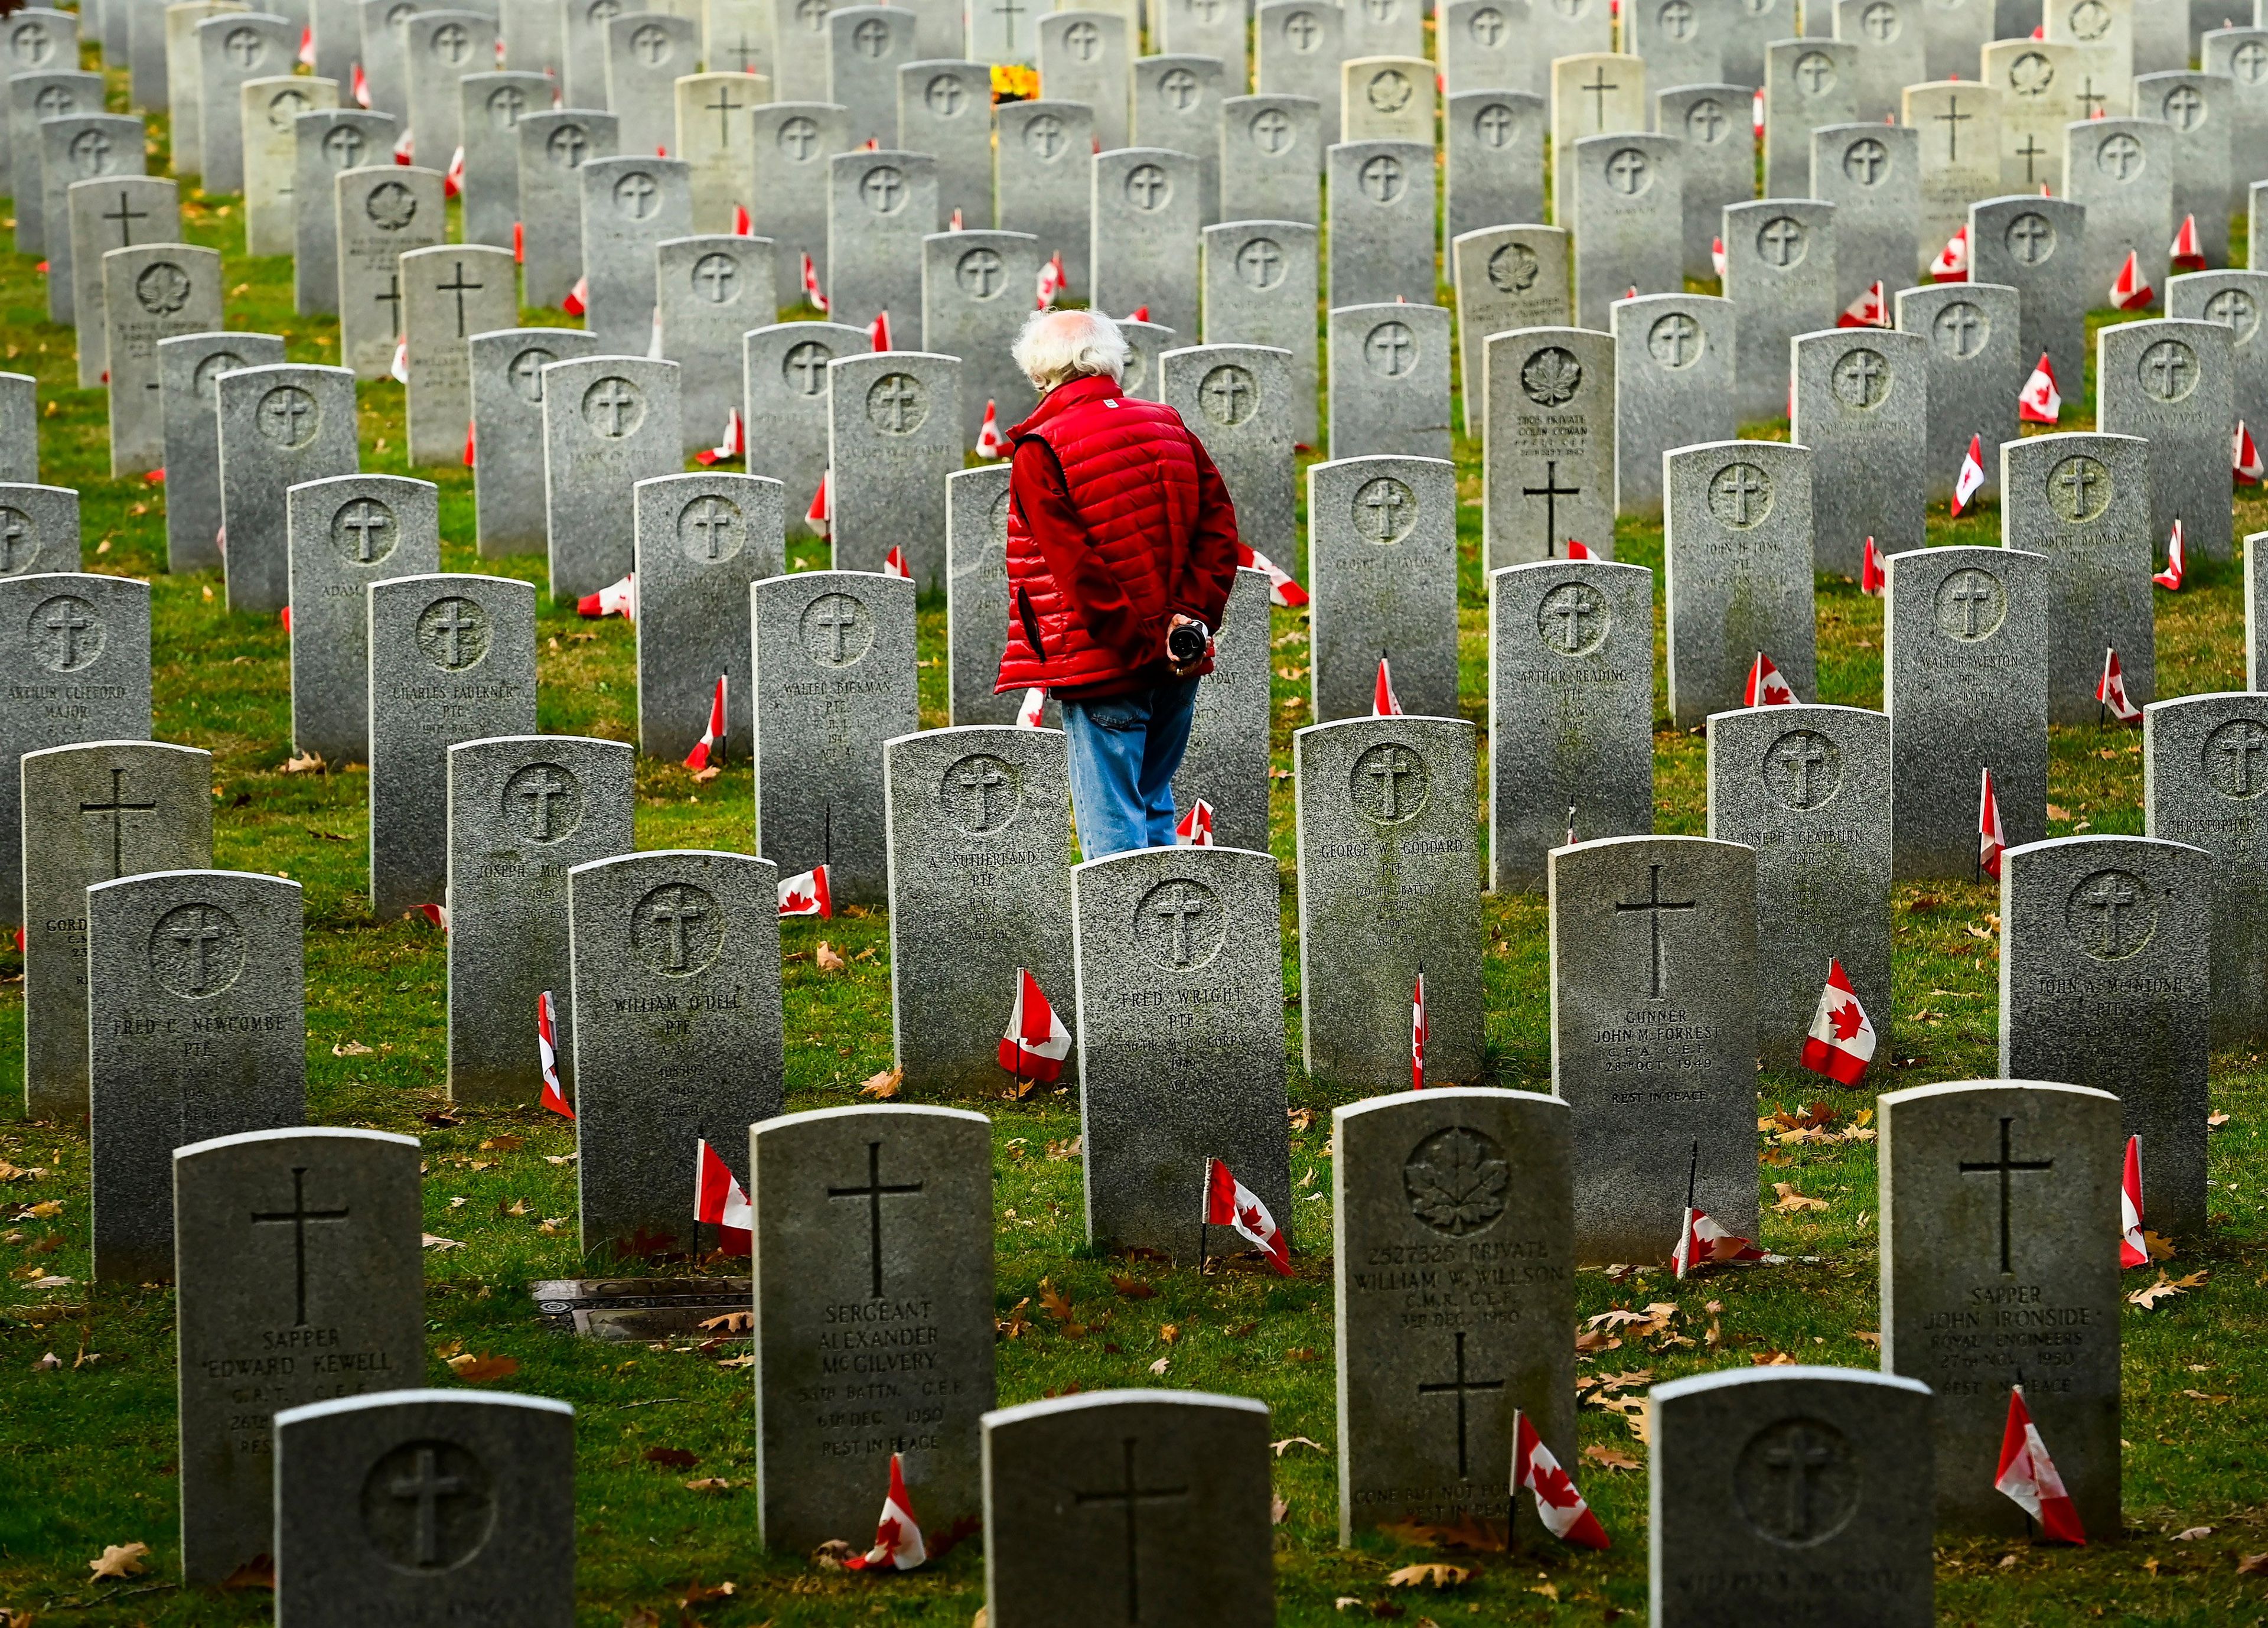 George McMenemy, 72, walks through the field of honour for fallen Canadian military war veterans at the Woodland Cemetery on Remembrance Day during the COVID-19 pandemic in Burlington, Ontario, Wednesday, Nov. 11, 2020. (Nathan Denette/CP)